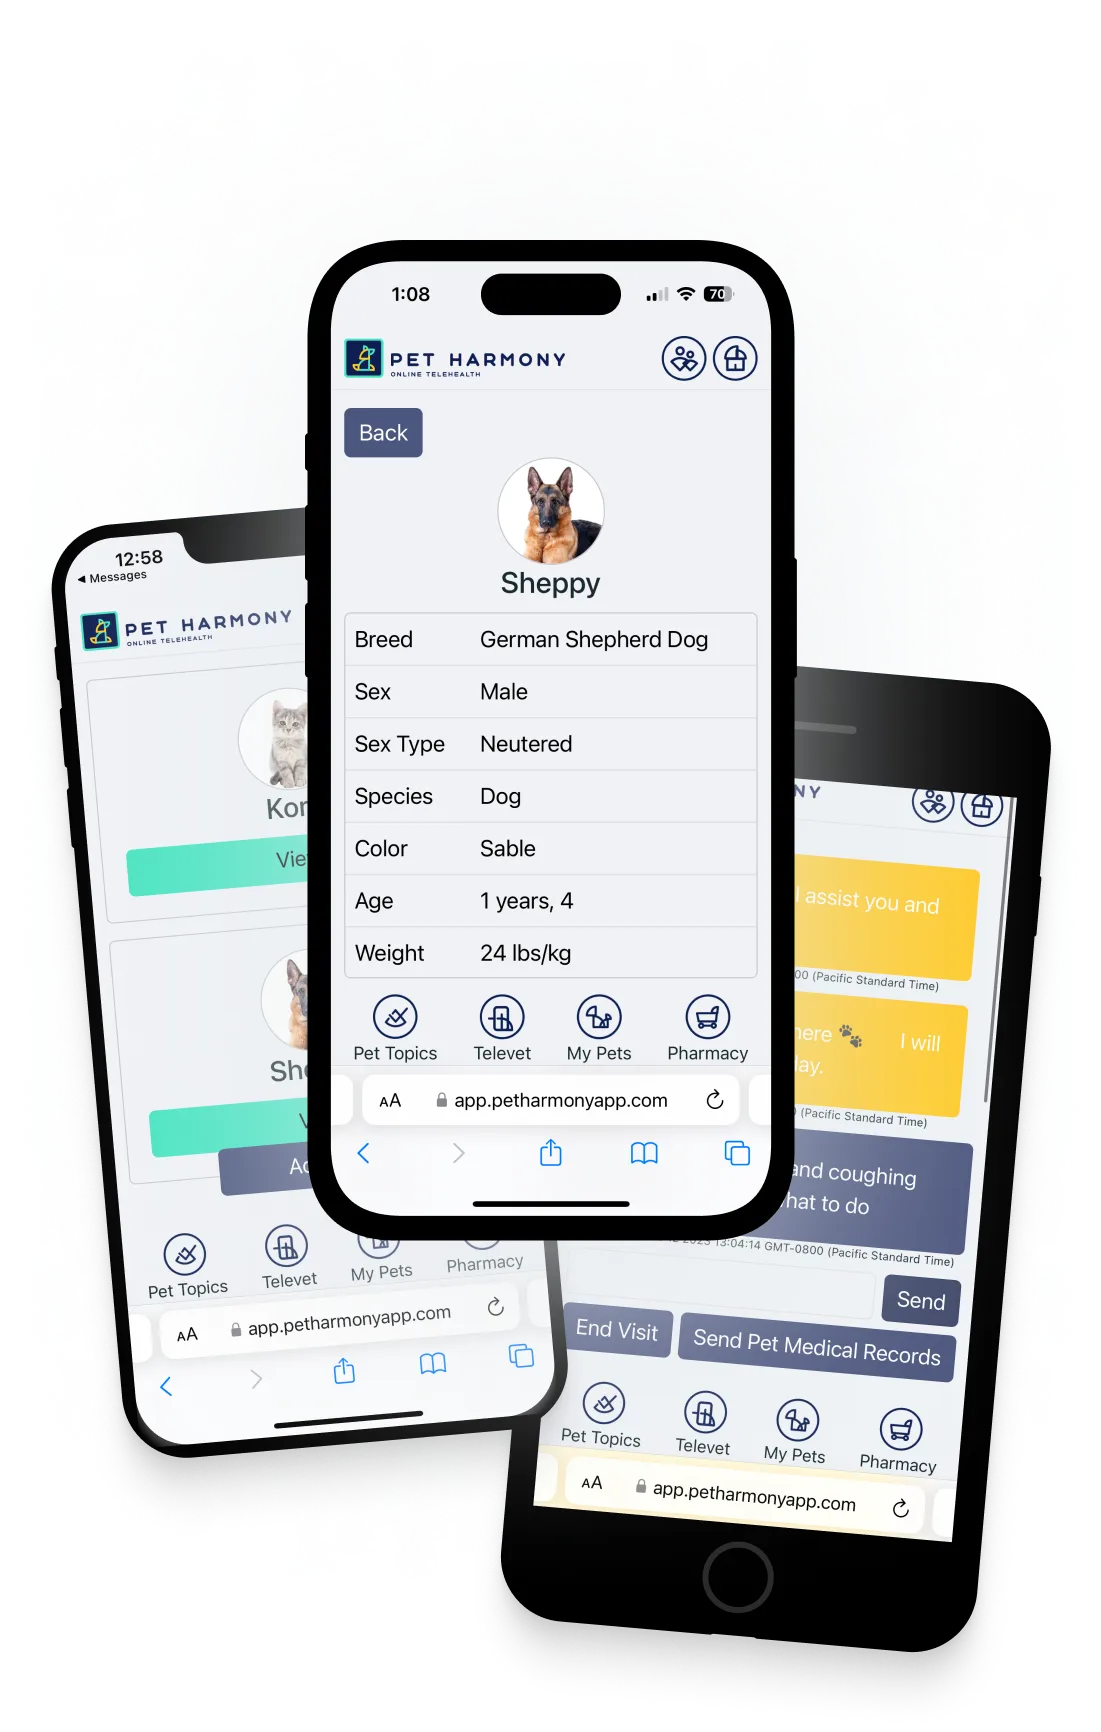 Prescriptions and online vet care 24/7 from the comfort of home.